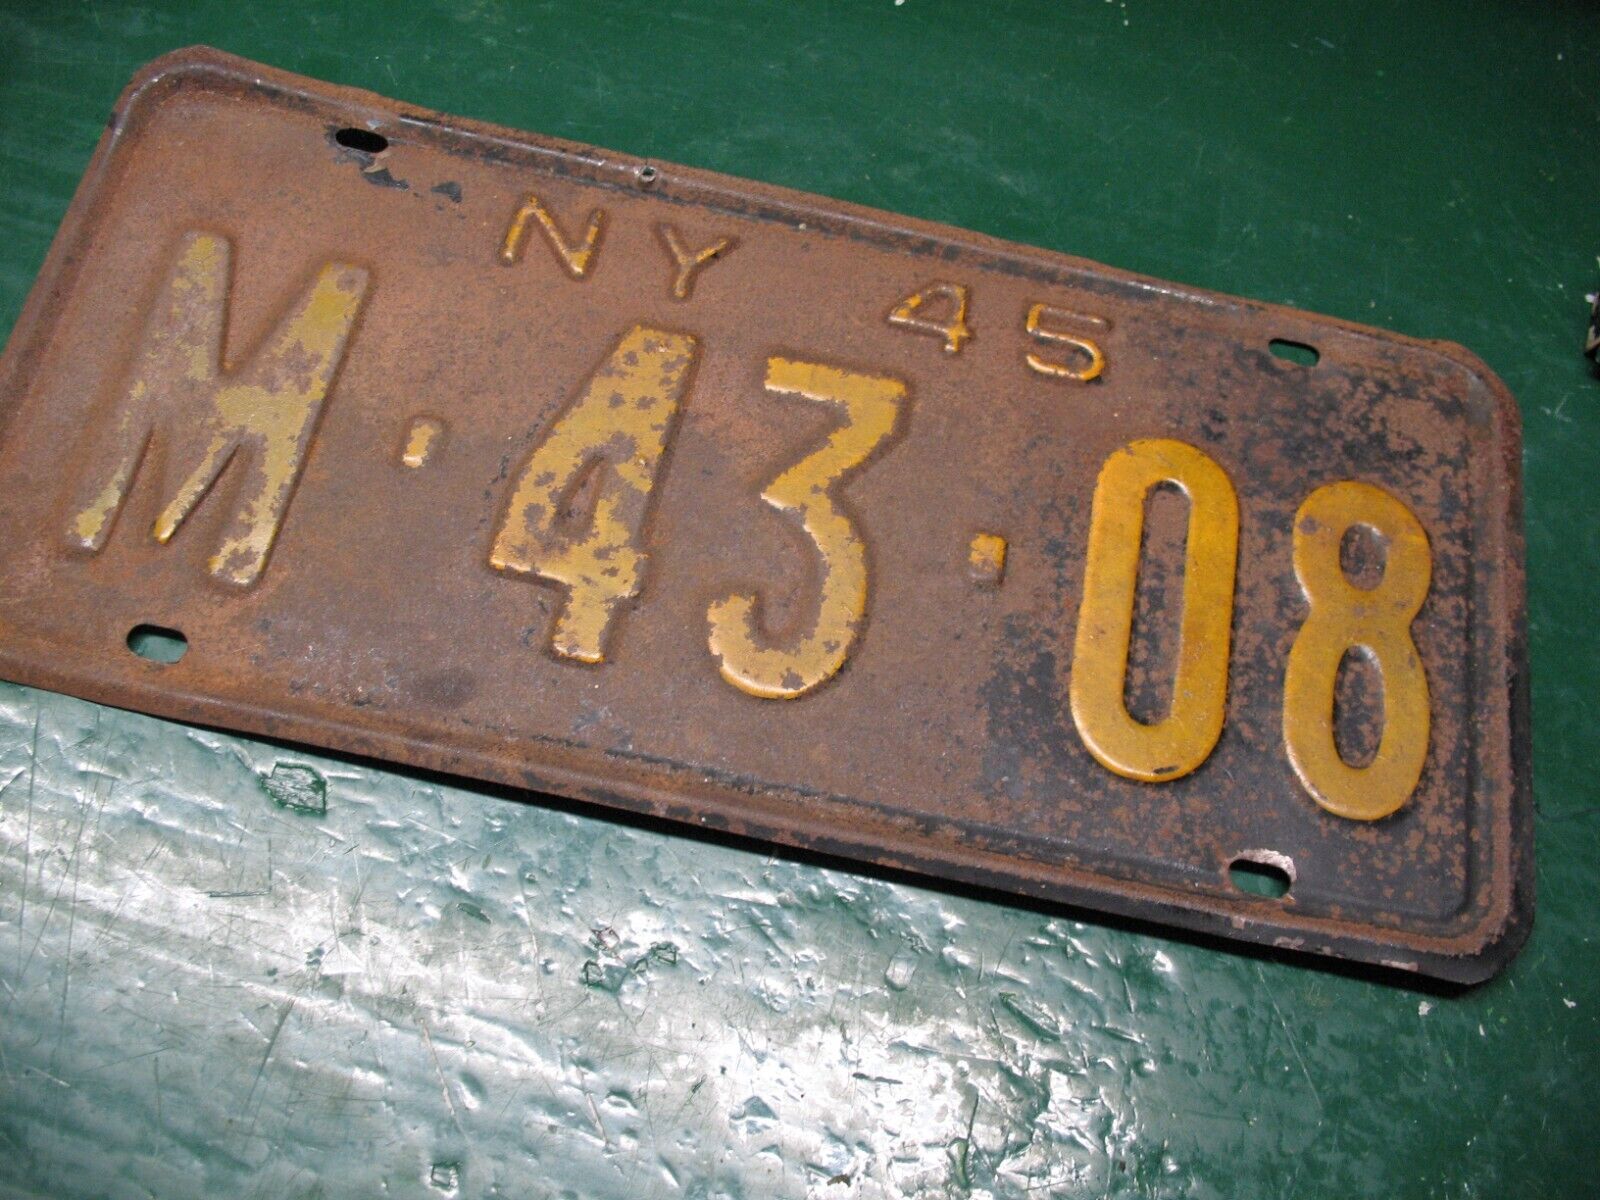 NY   1945 LICENSE PLATE  M - 43 - 08  SURFACE OXIDATION